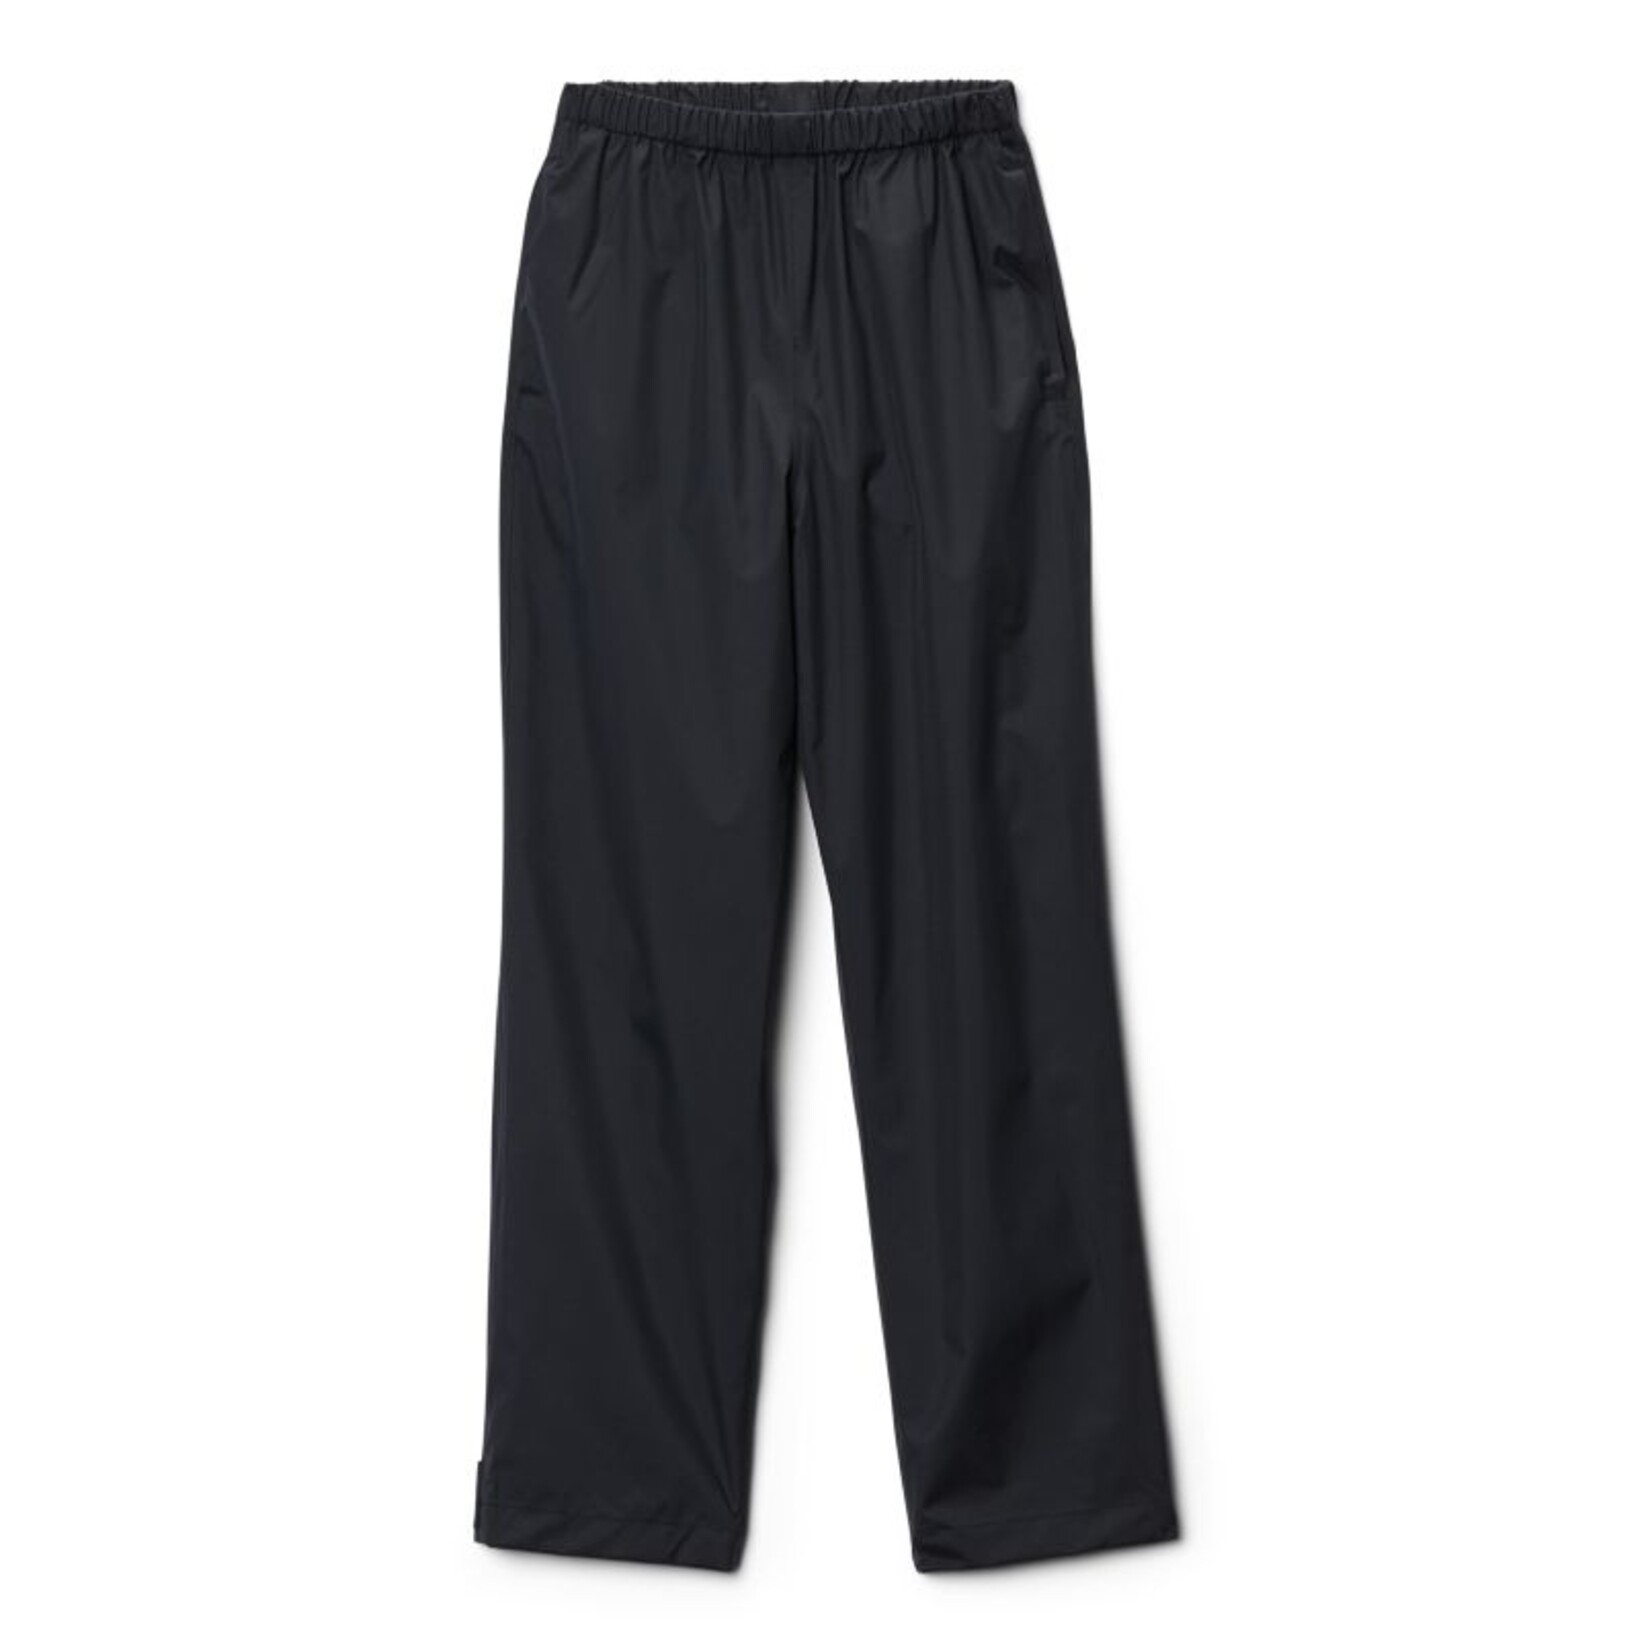 COLUMBIA SPORTSWEAR Youth Trail Adventure Pant